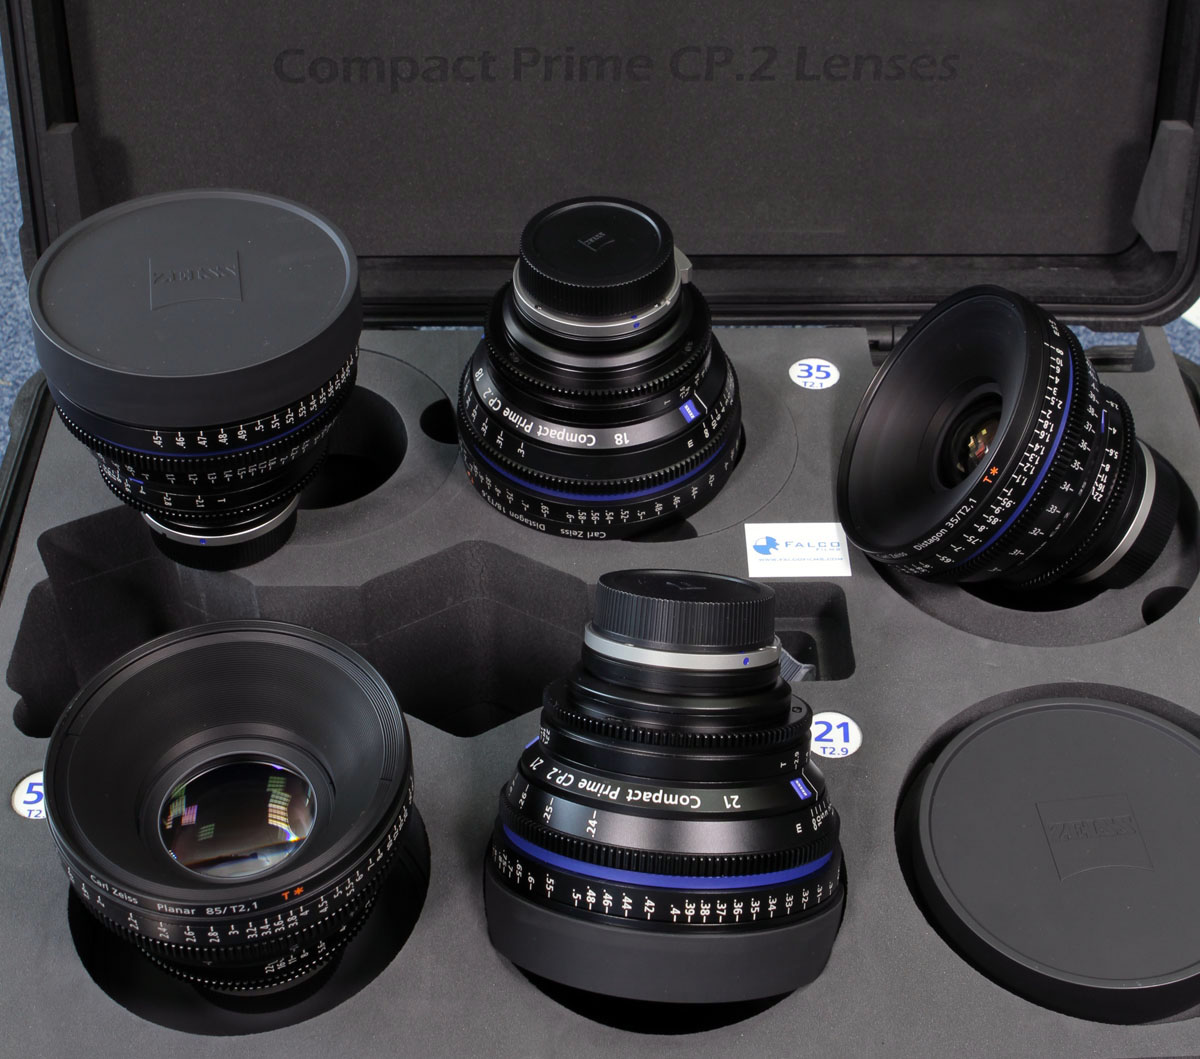 ZEISS Compact Prime CP.2 35mm T2.1